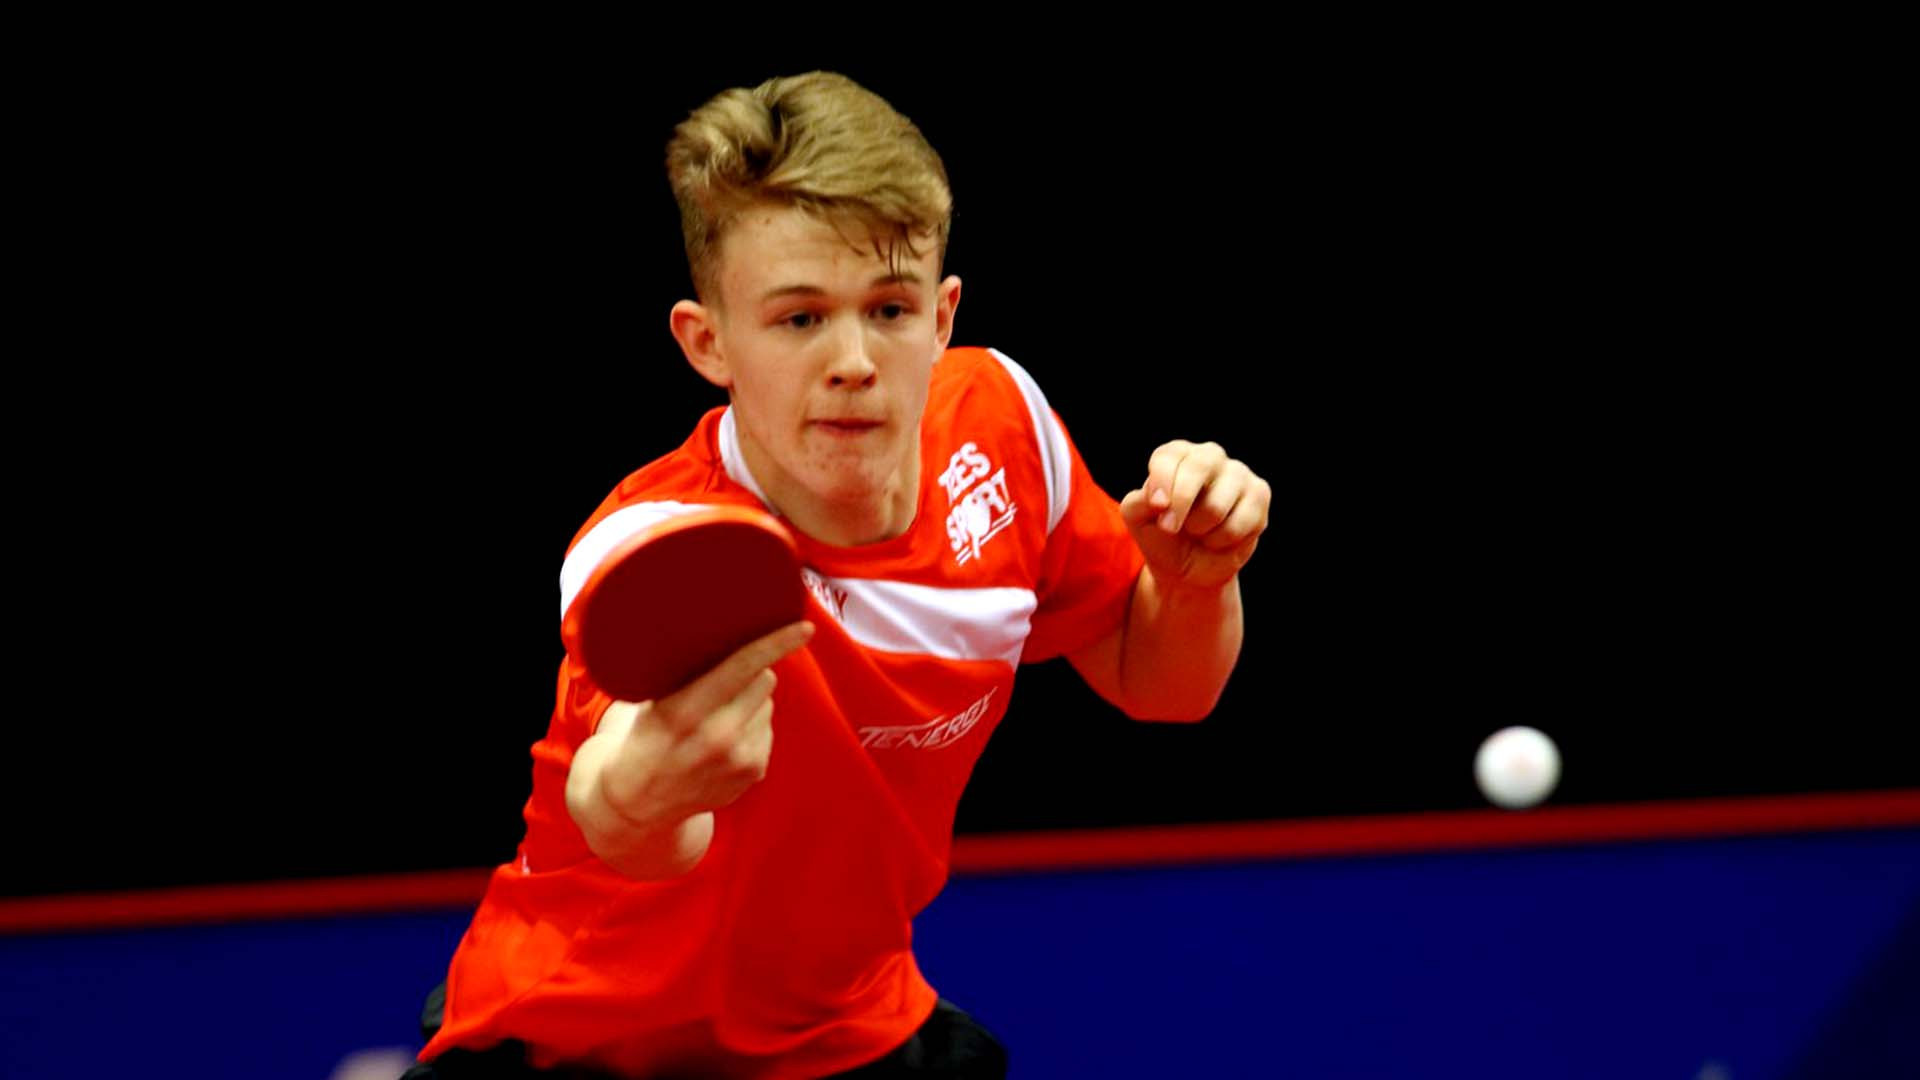 Jarvis stuns Singapore veteran as qualifying action continues at ITTF Swedish Open